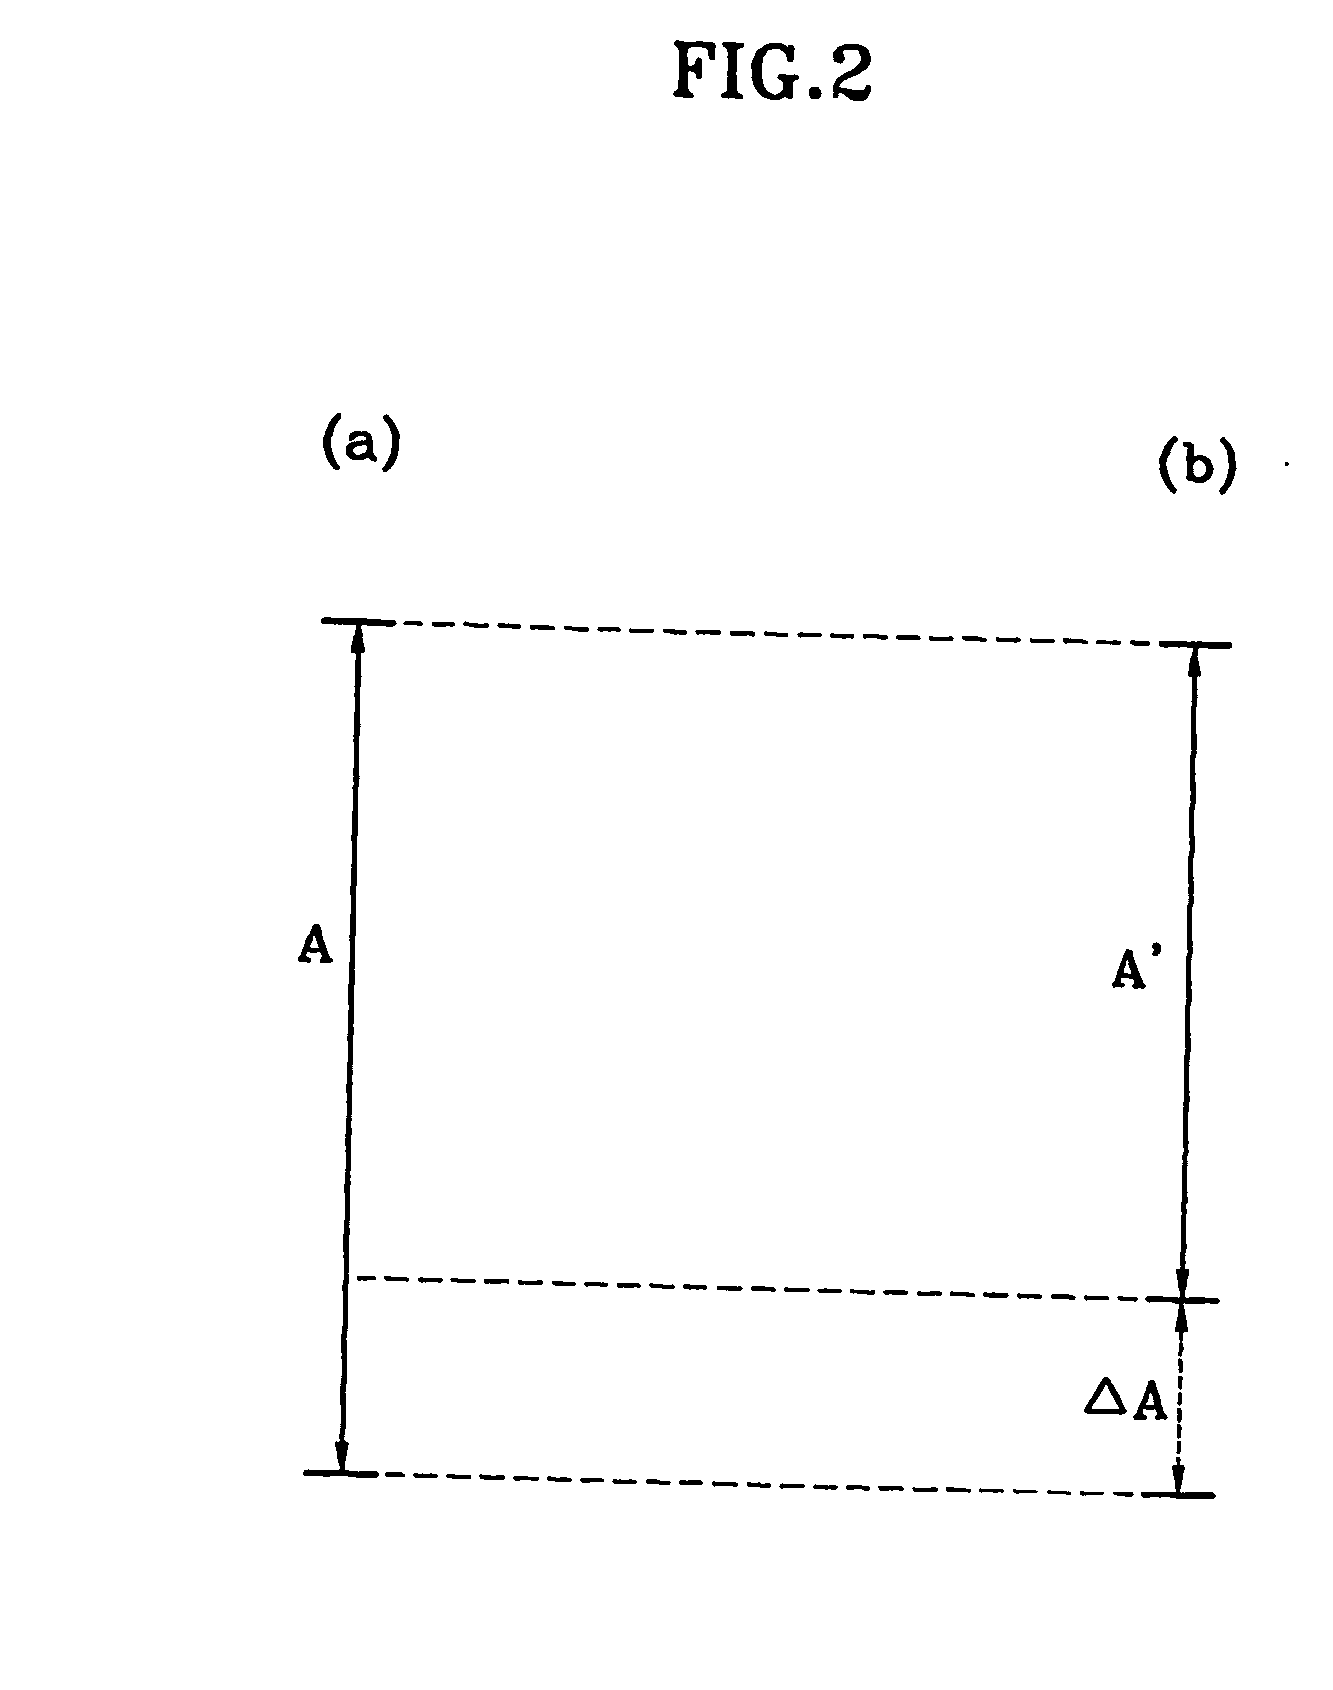 Circuit for detecting electric current